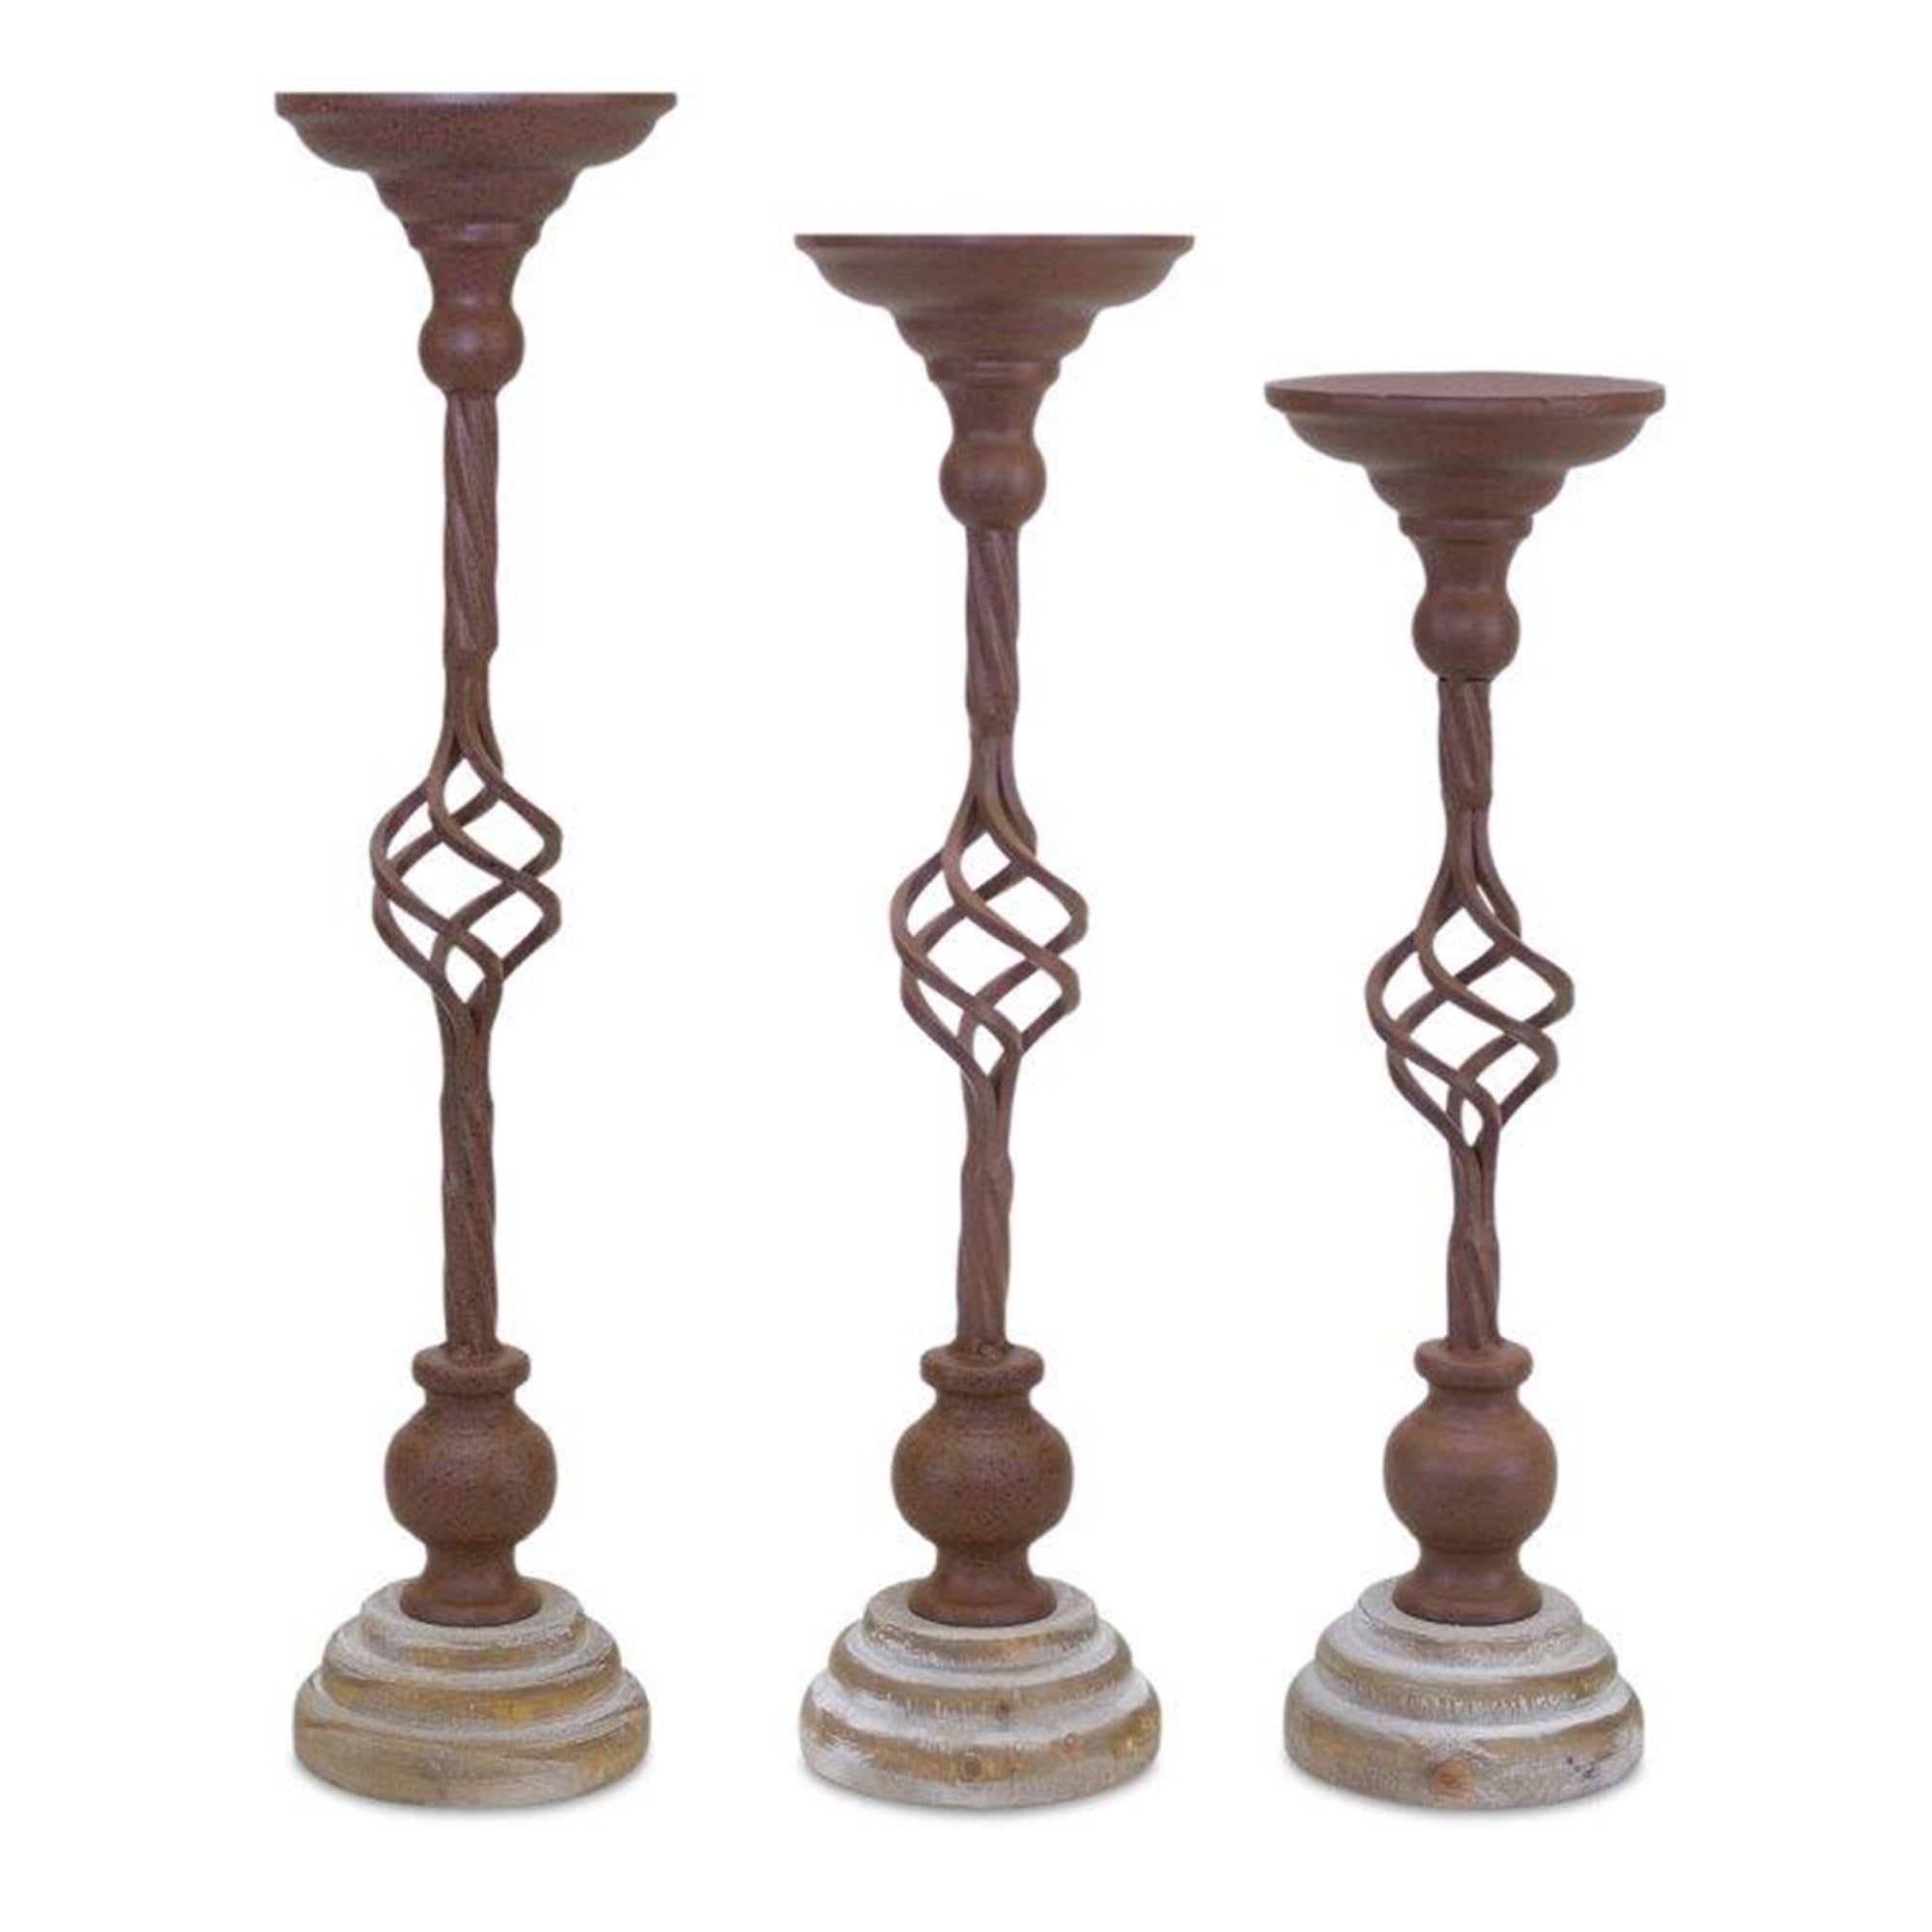 Candle Holder (Set of 3) 14.75"H, 16.25"H, 17.5"H Iron/Wood